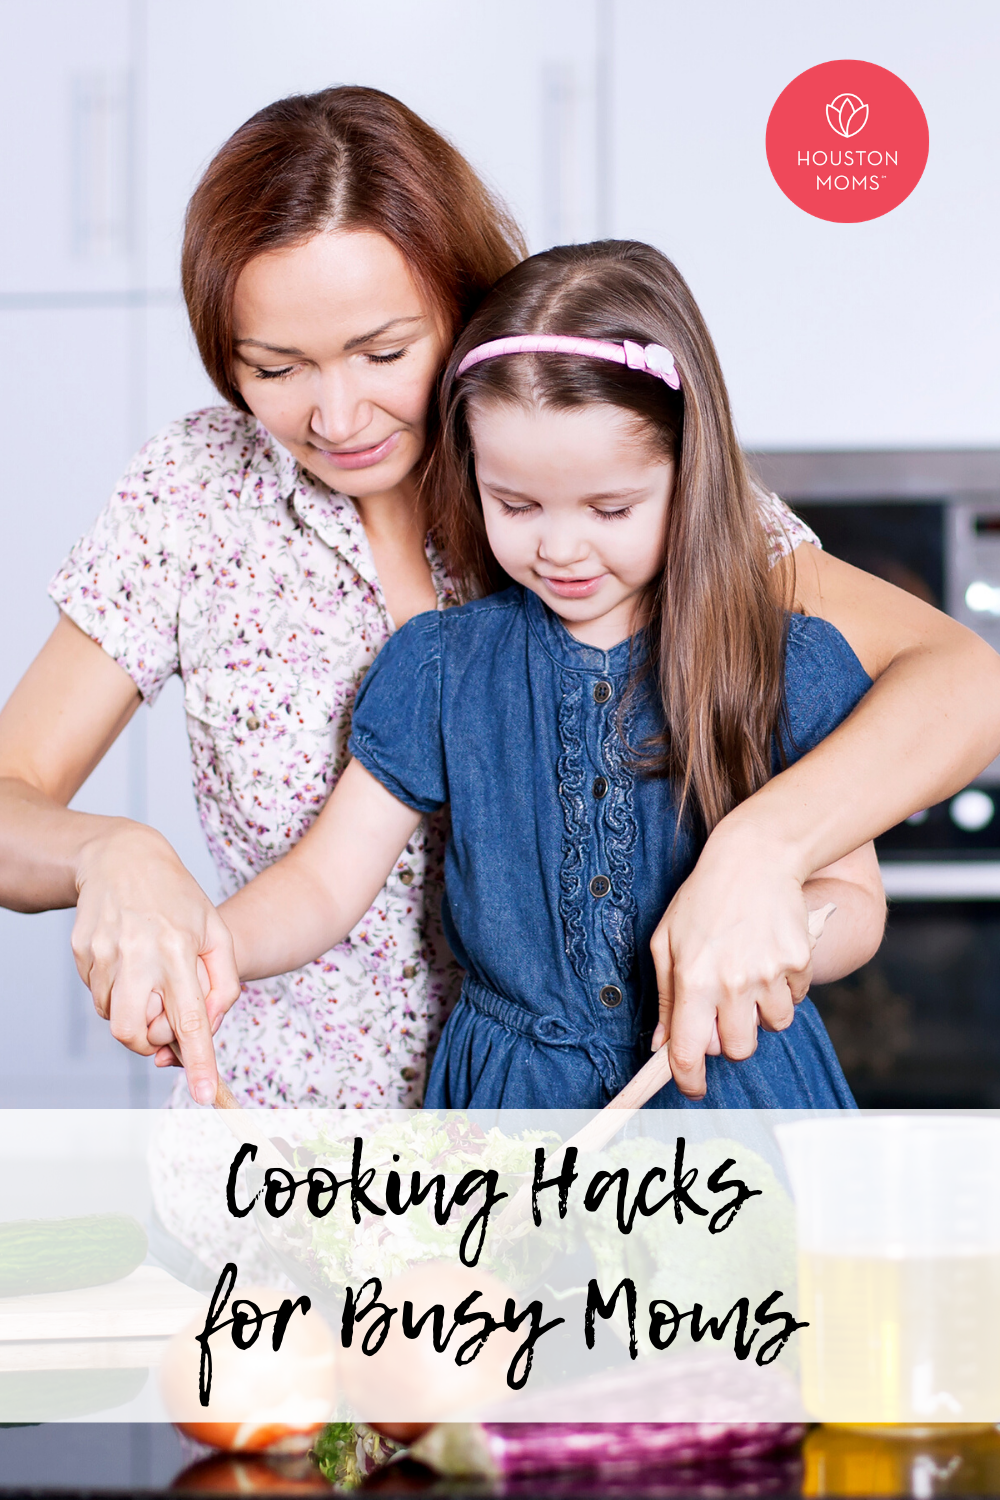 Houston Moms "Cooking Hacks for Busy Moms" #houstonmoms #houstonmomsblog #momsaroundhouston